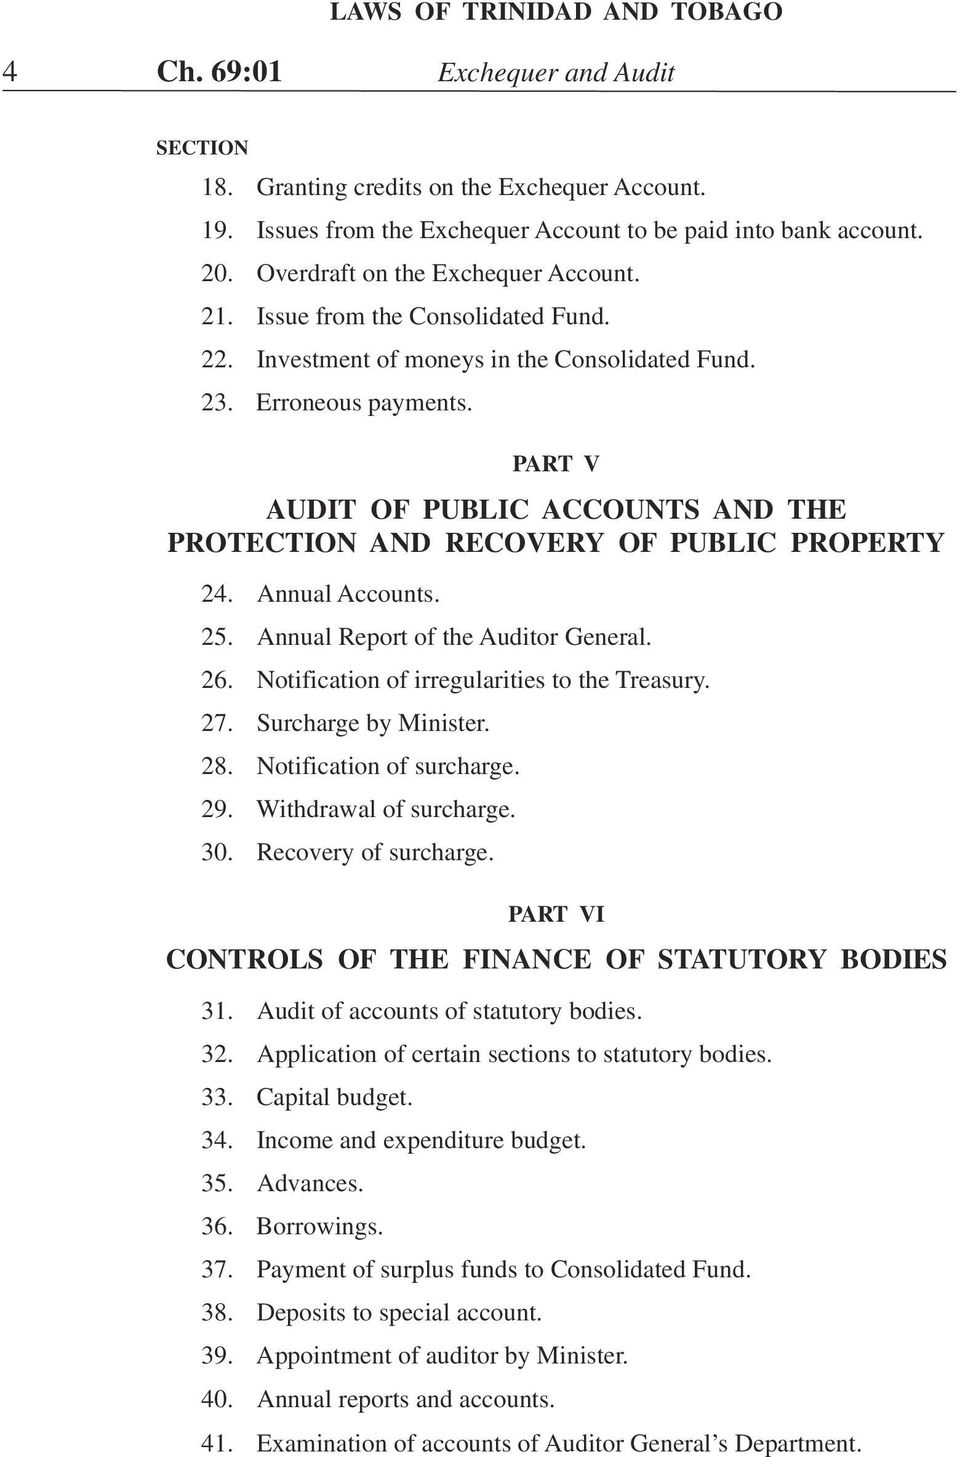 PART V AUDIT OF PUBLIC ACCOUNTS AND THE PROTECTION AND RECOVERY OF PUBLIC PROPERTY 24. Annual Accounts. 25. Annual Report of the Auditor General. 26. Notification of irregularities to the Treasury.